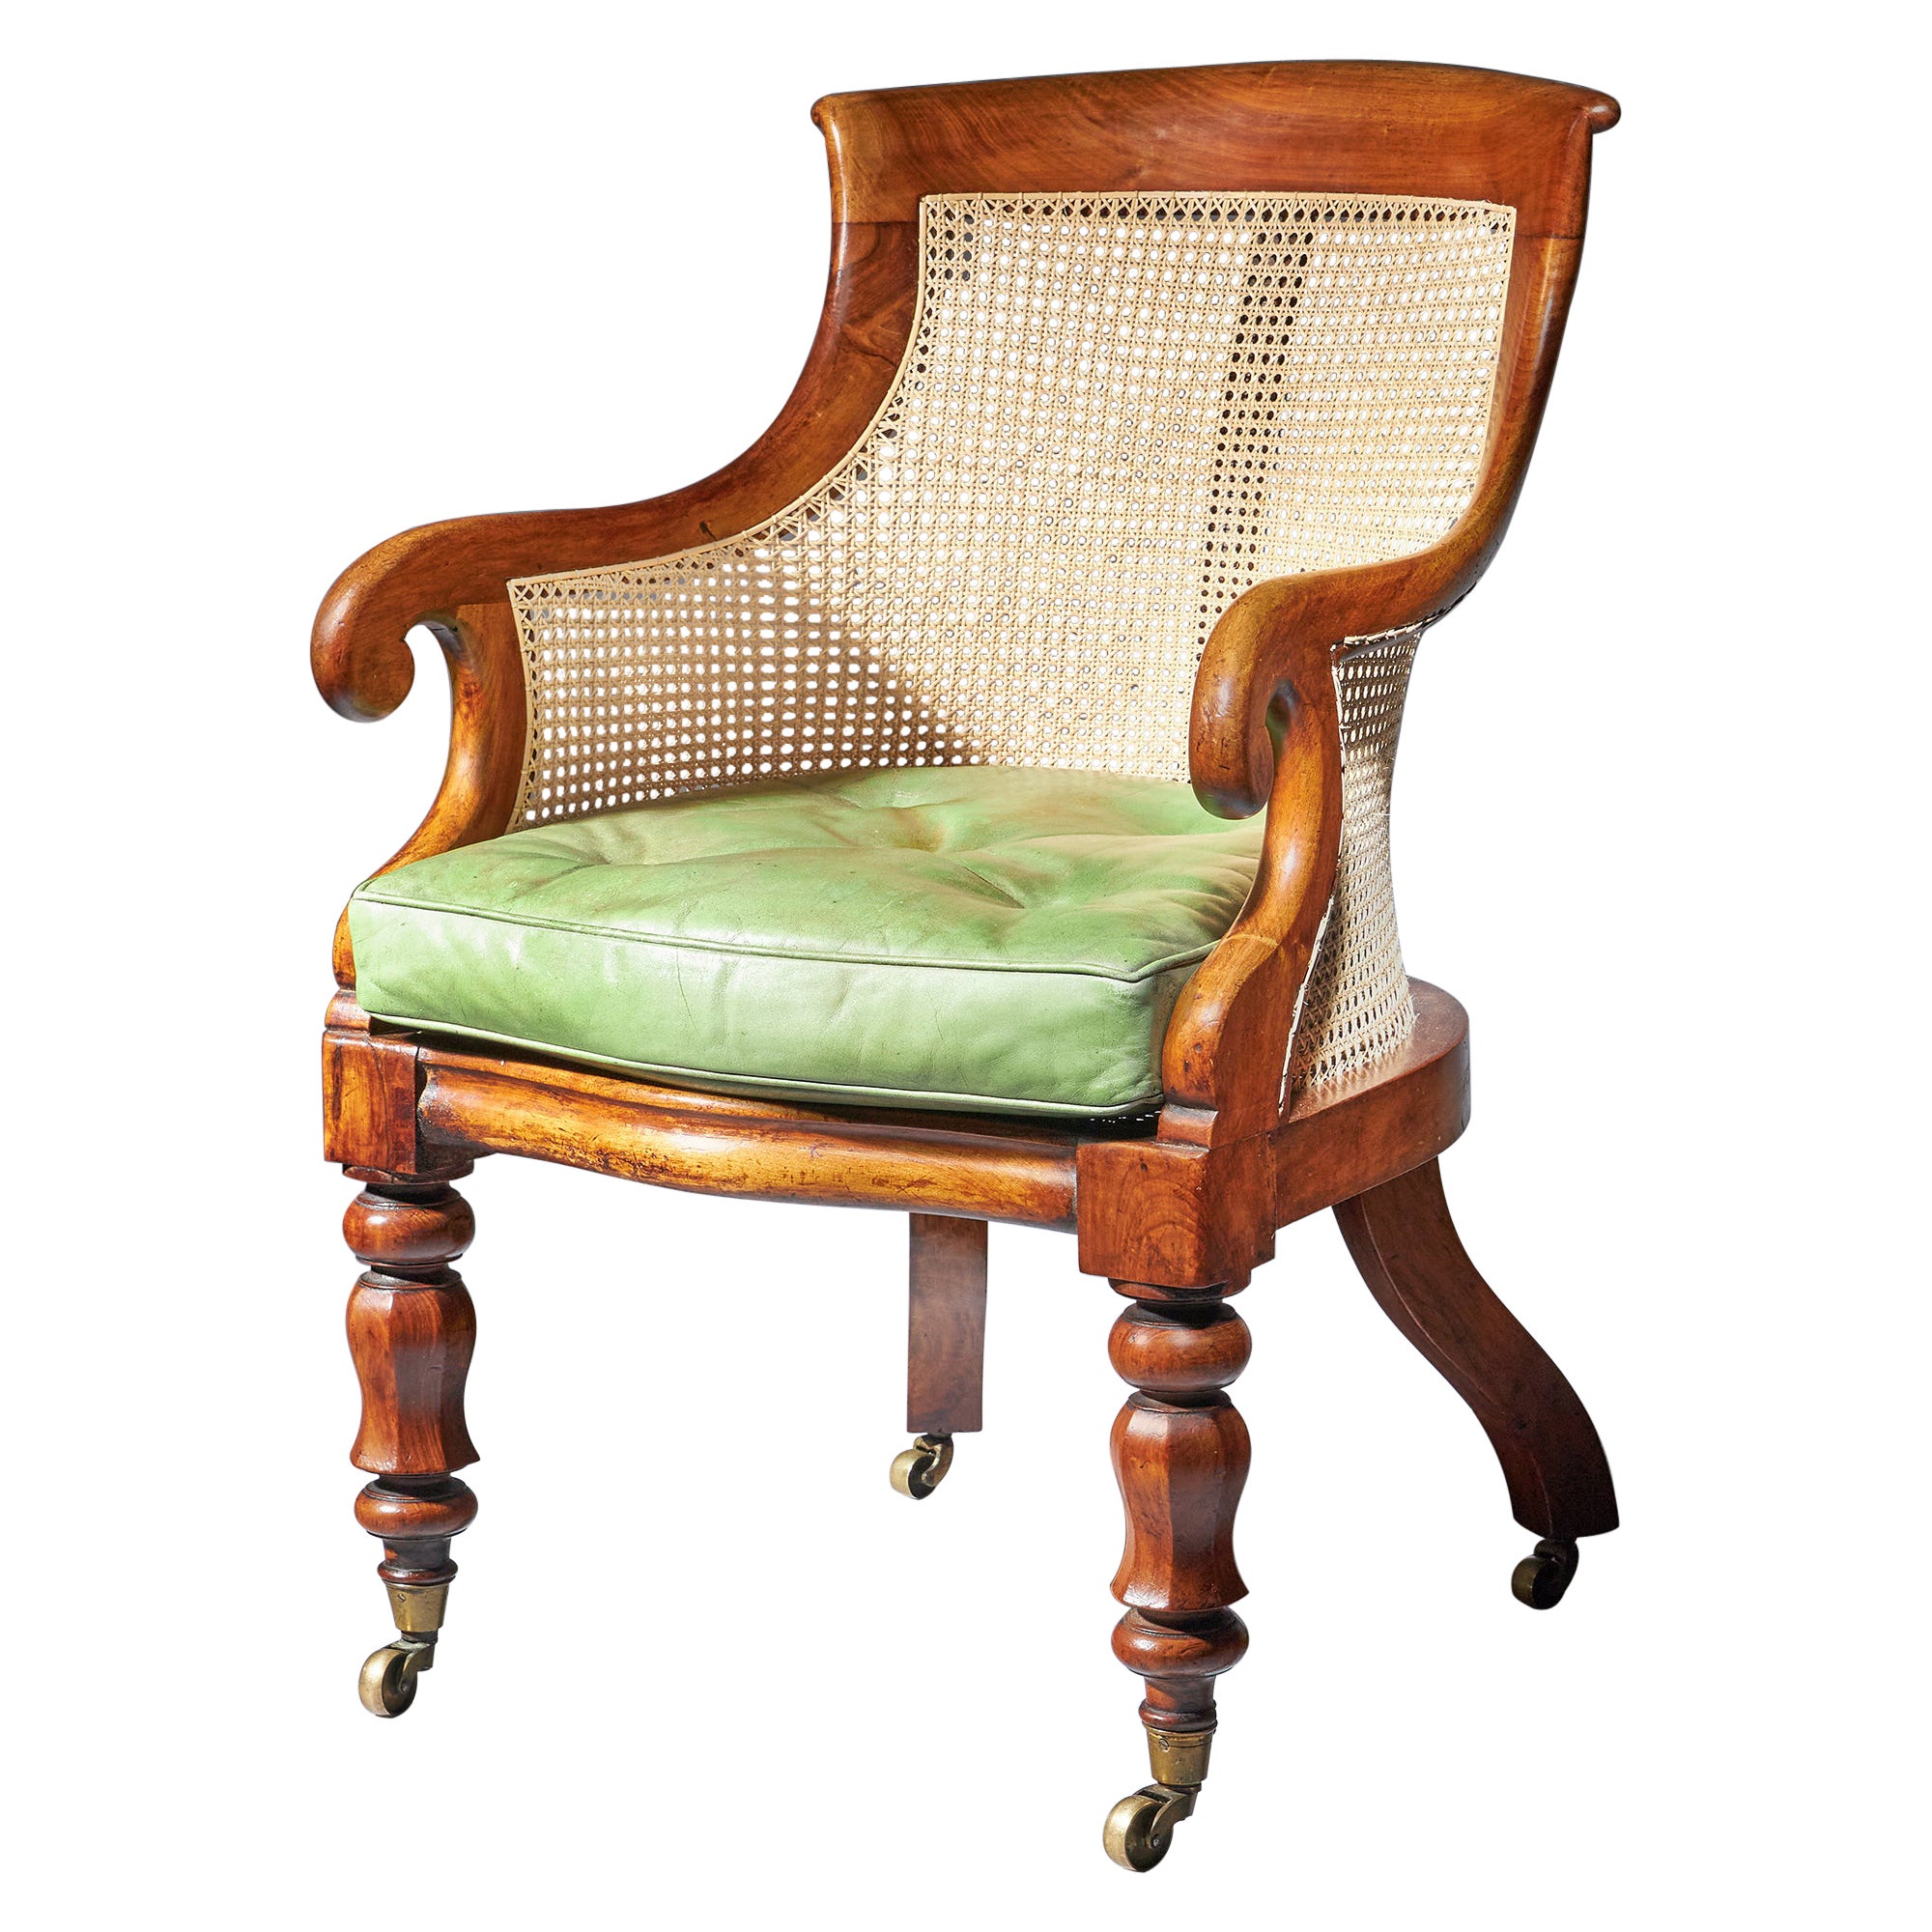 19th Century William IV Mahogany Bergère Armchair with Leather Cushion For Sale